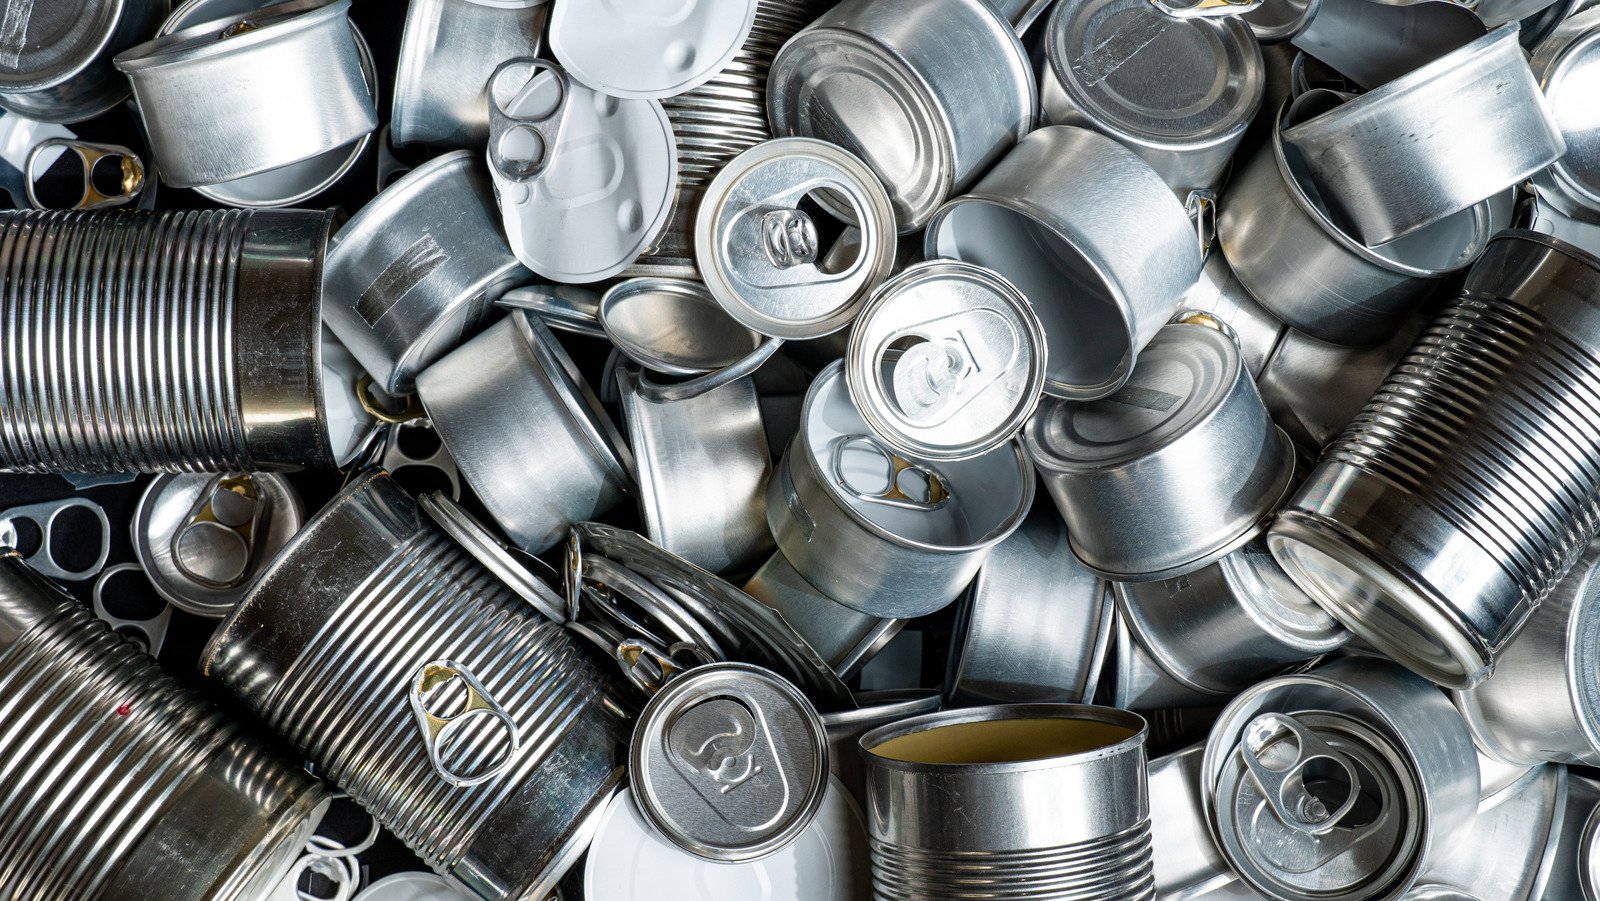 https://www.tastingtable.com/img/gallery/the-science-behind-why-some-canned-foods-are-tin-rather-than-aluminum/l-intro-1701128029.jpg